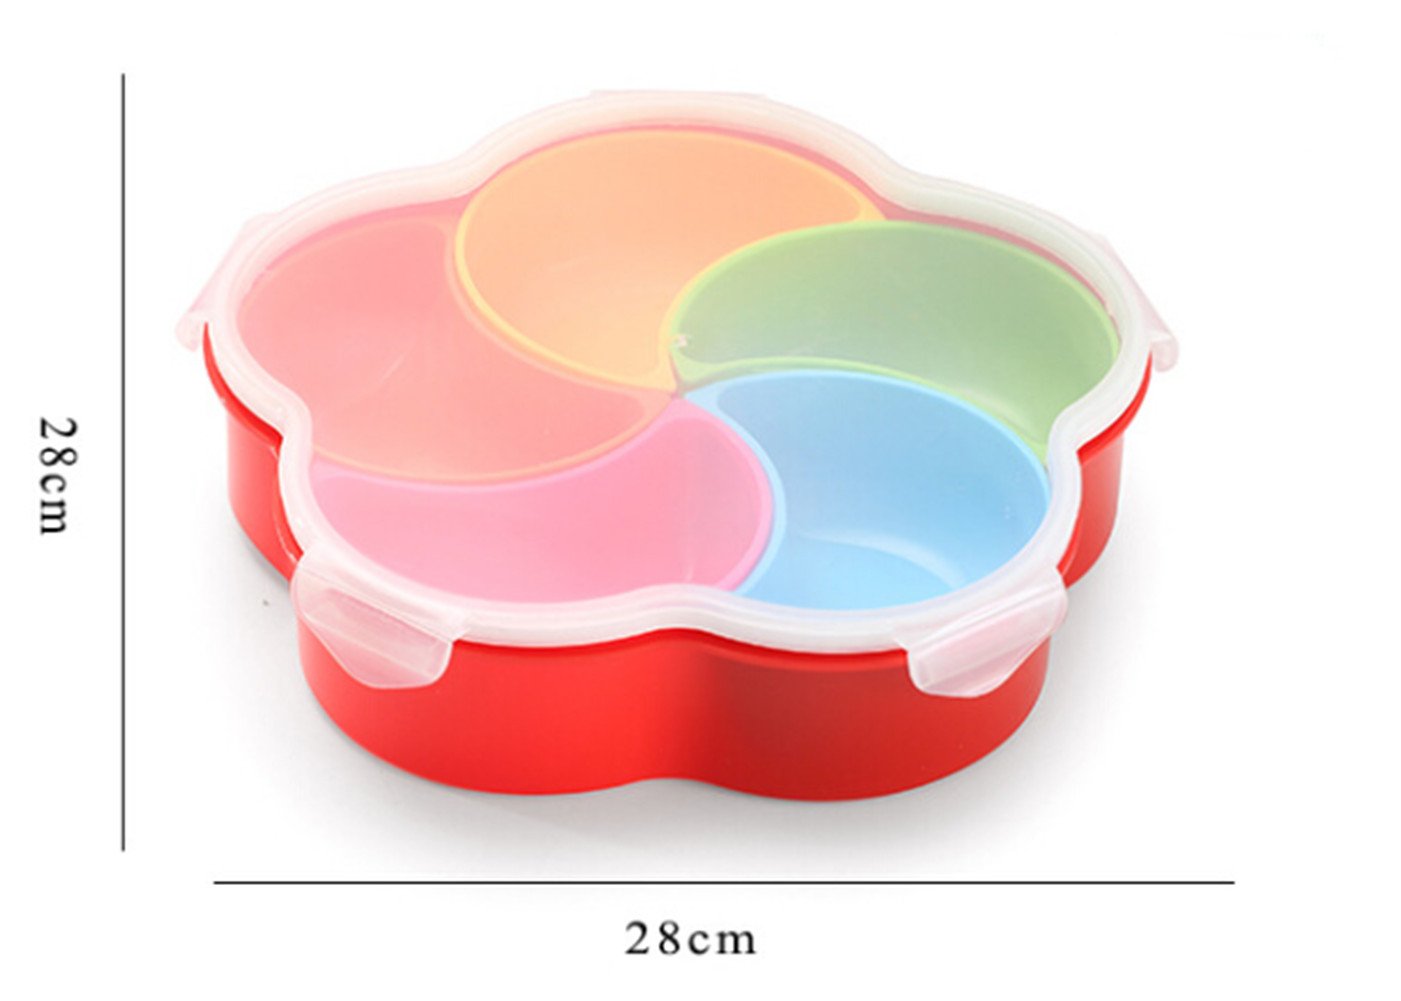 Emoyi Plastic Decorative Serving Trays Food Container with Lid and Removable Cup Appetizer Plates for Holiday Party and Kitchen